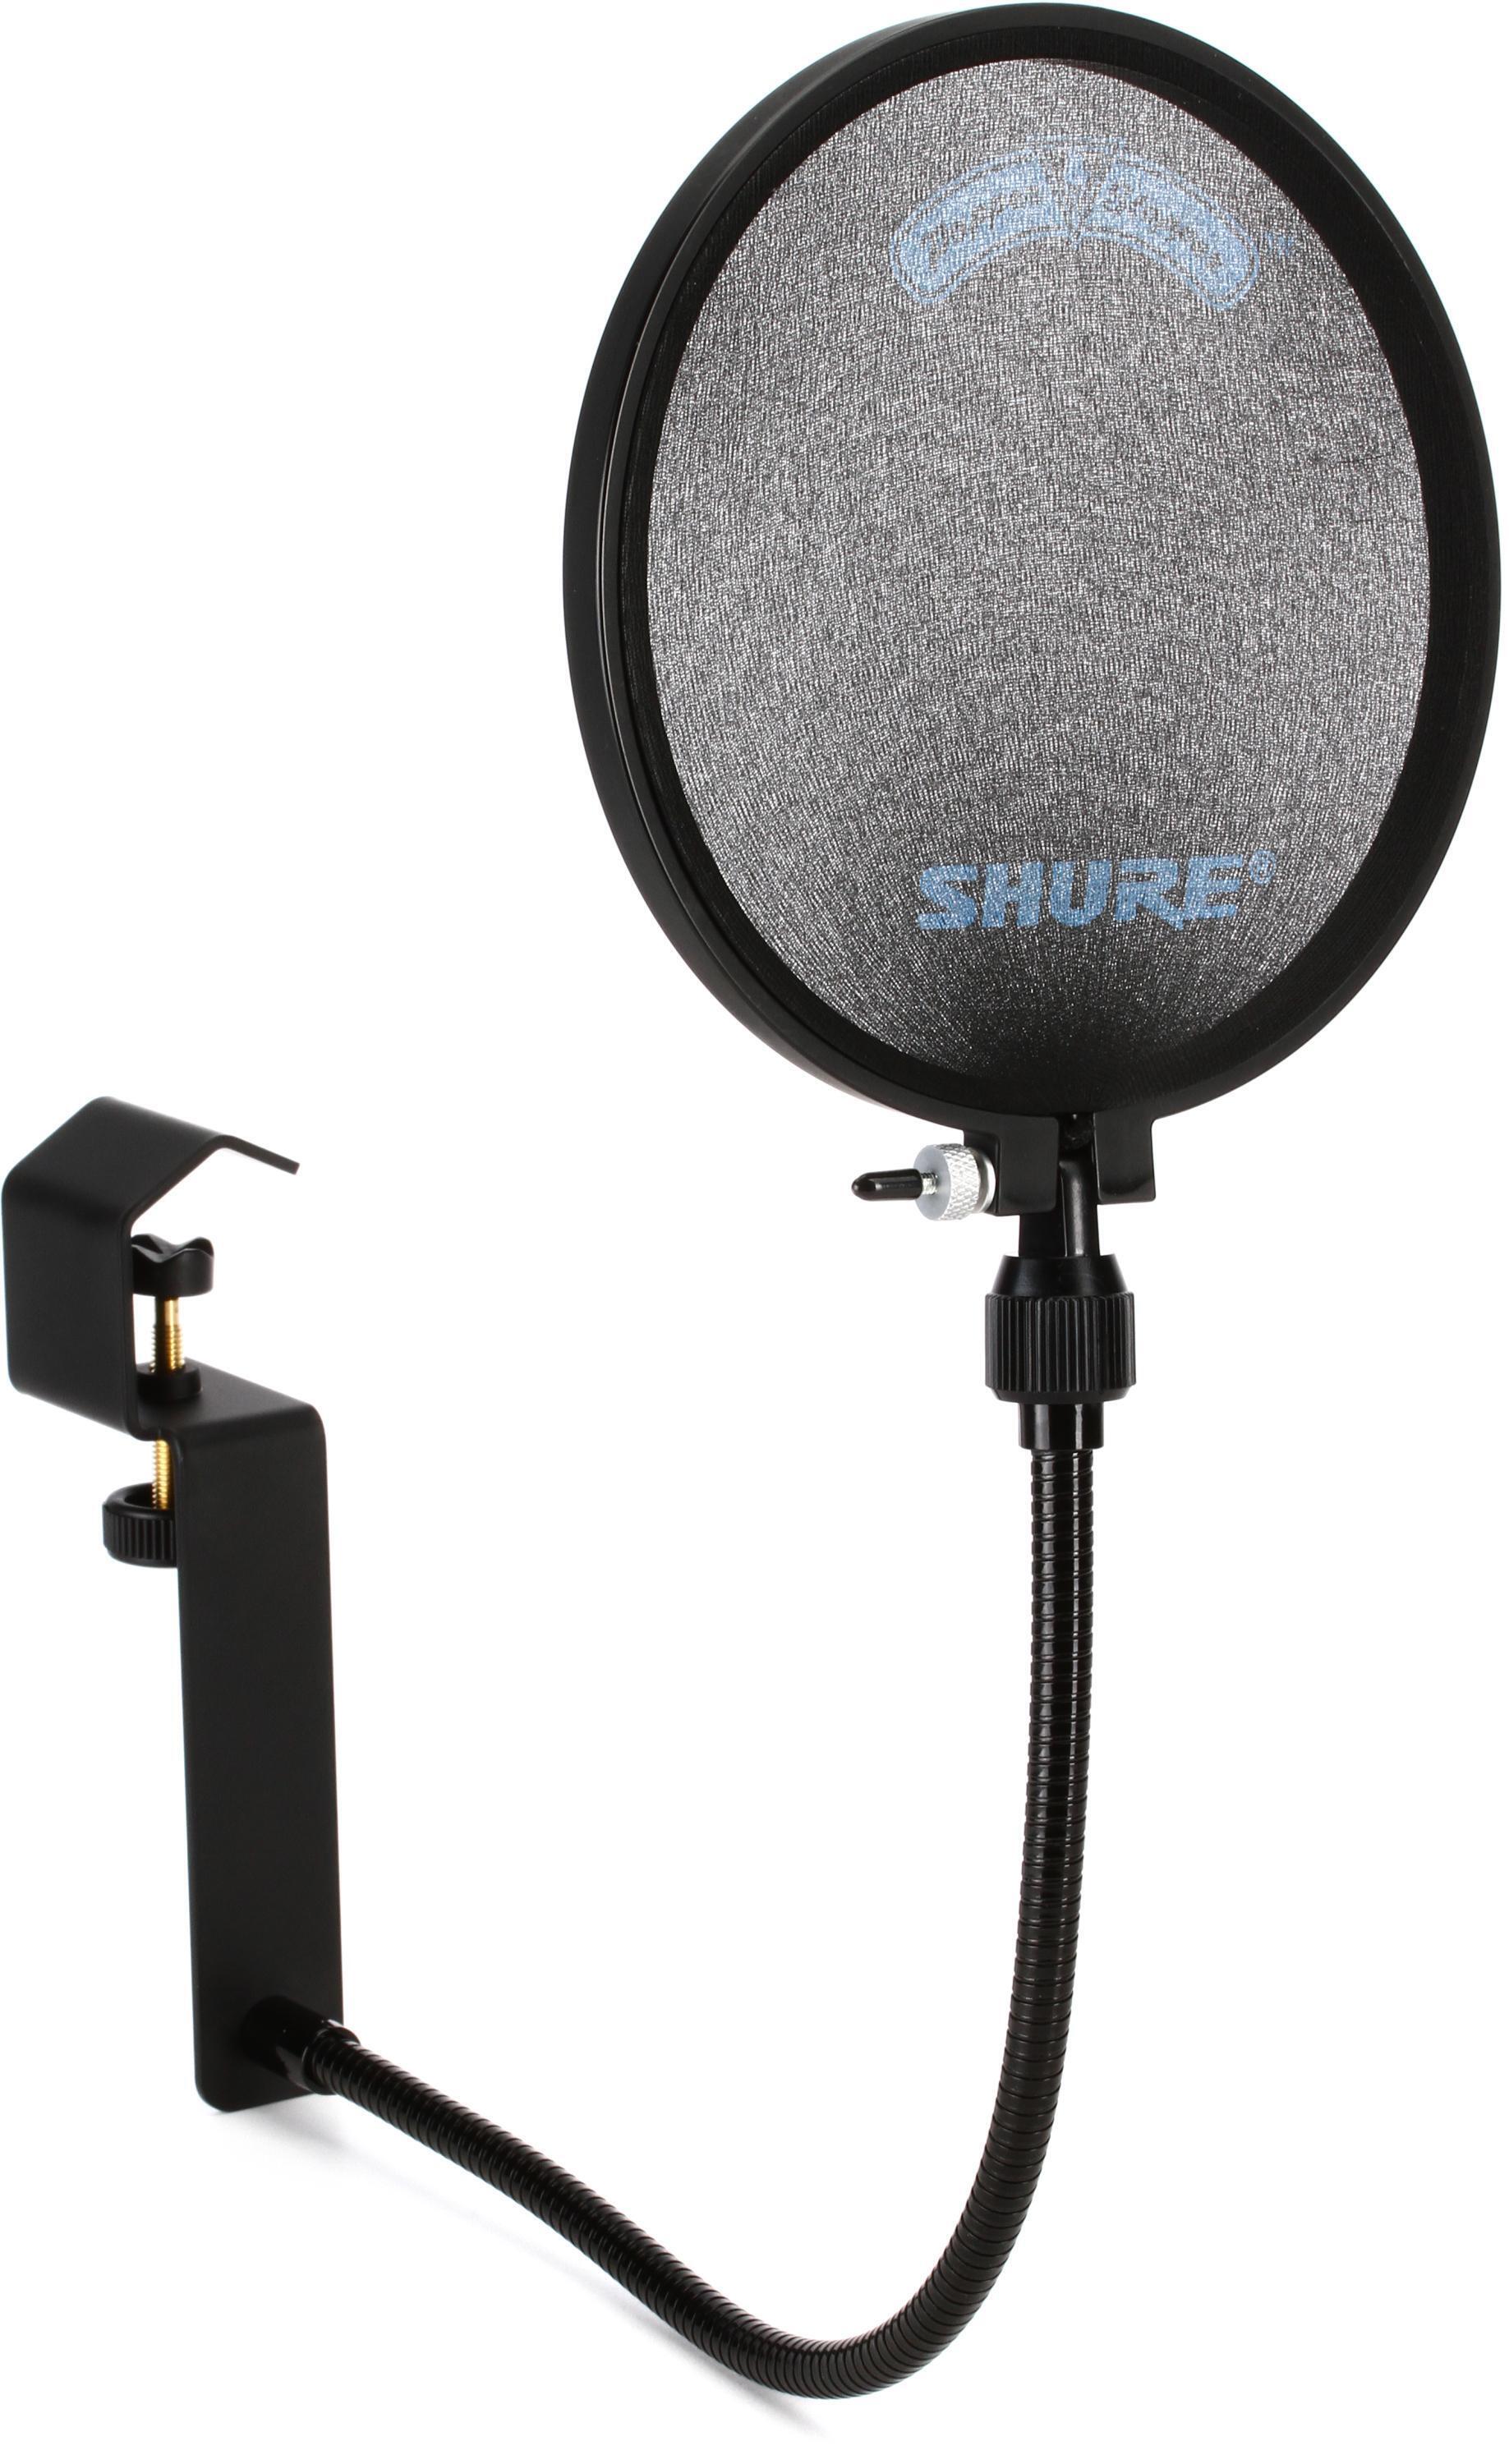  Microphone Pop Filter, Wind Shield Acoustic Filter for